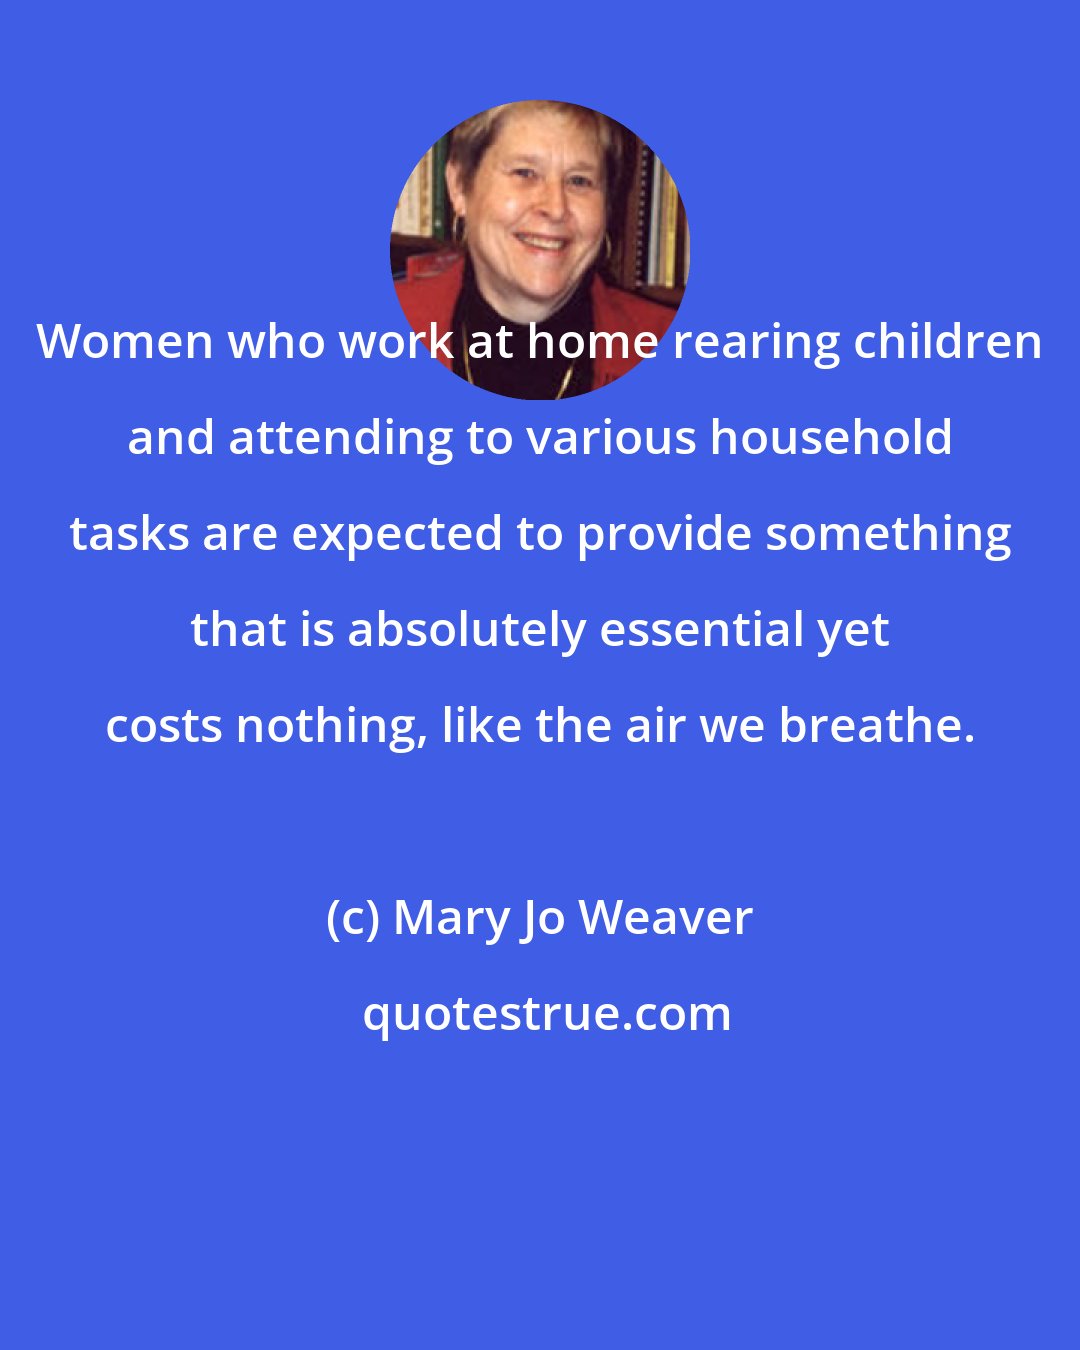 Mary Jo Weaver: Women who work at home rearing children and attending to various household tasks are expected to provide something that is absolutely essential yet costs nothing, like the air we breathe.